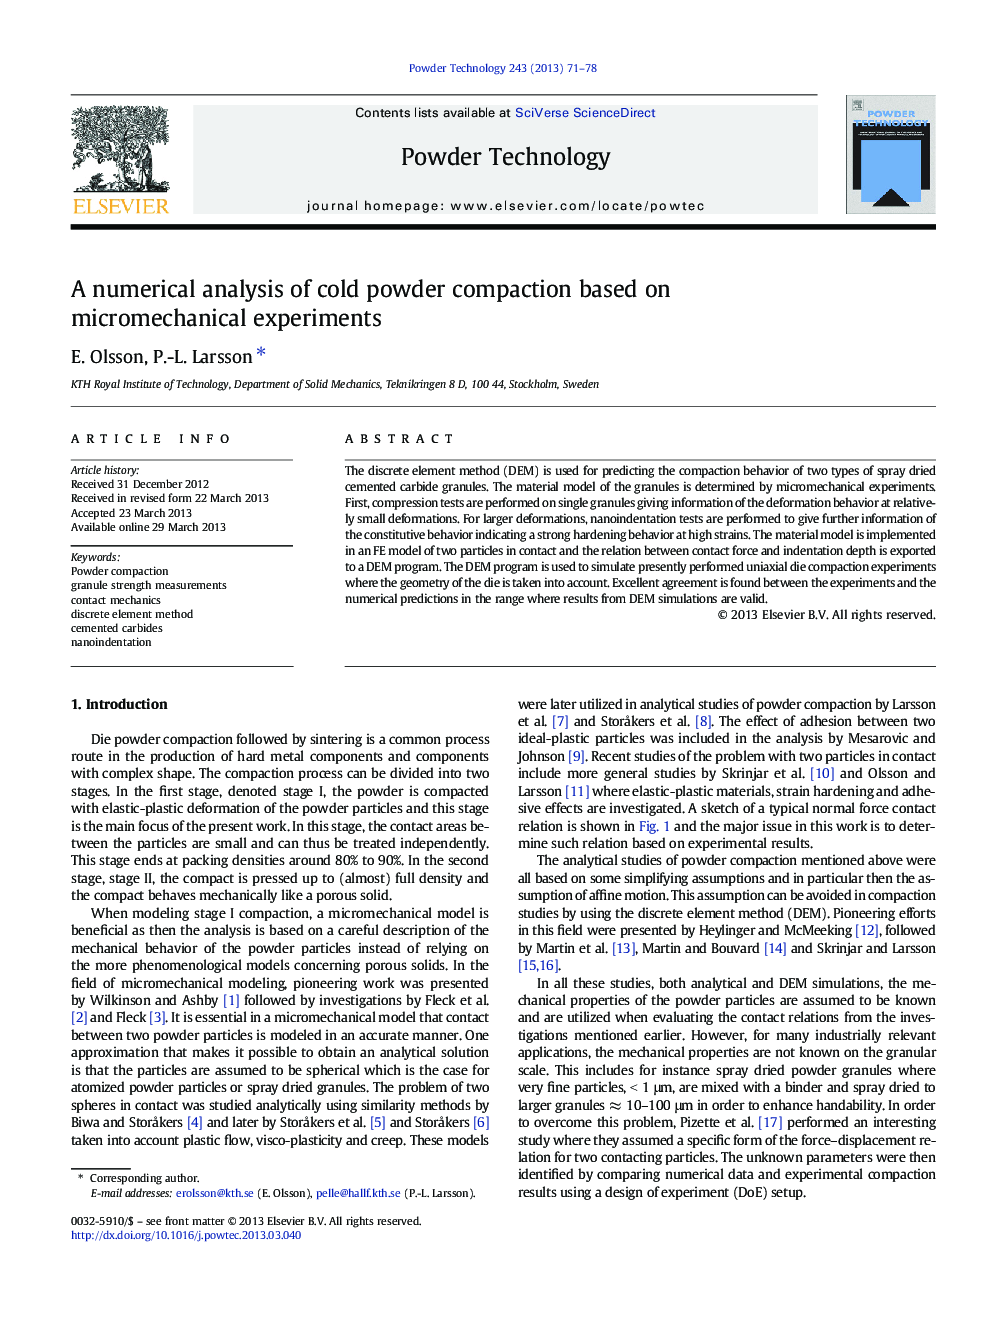 A numerical analysis of cold powder compaction based on micromechanical experiments